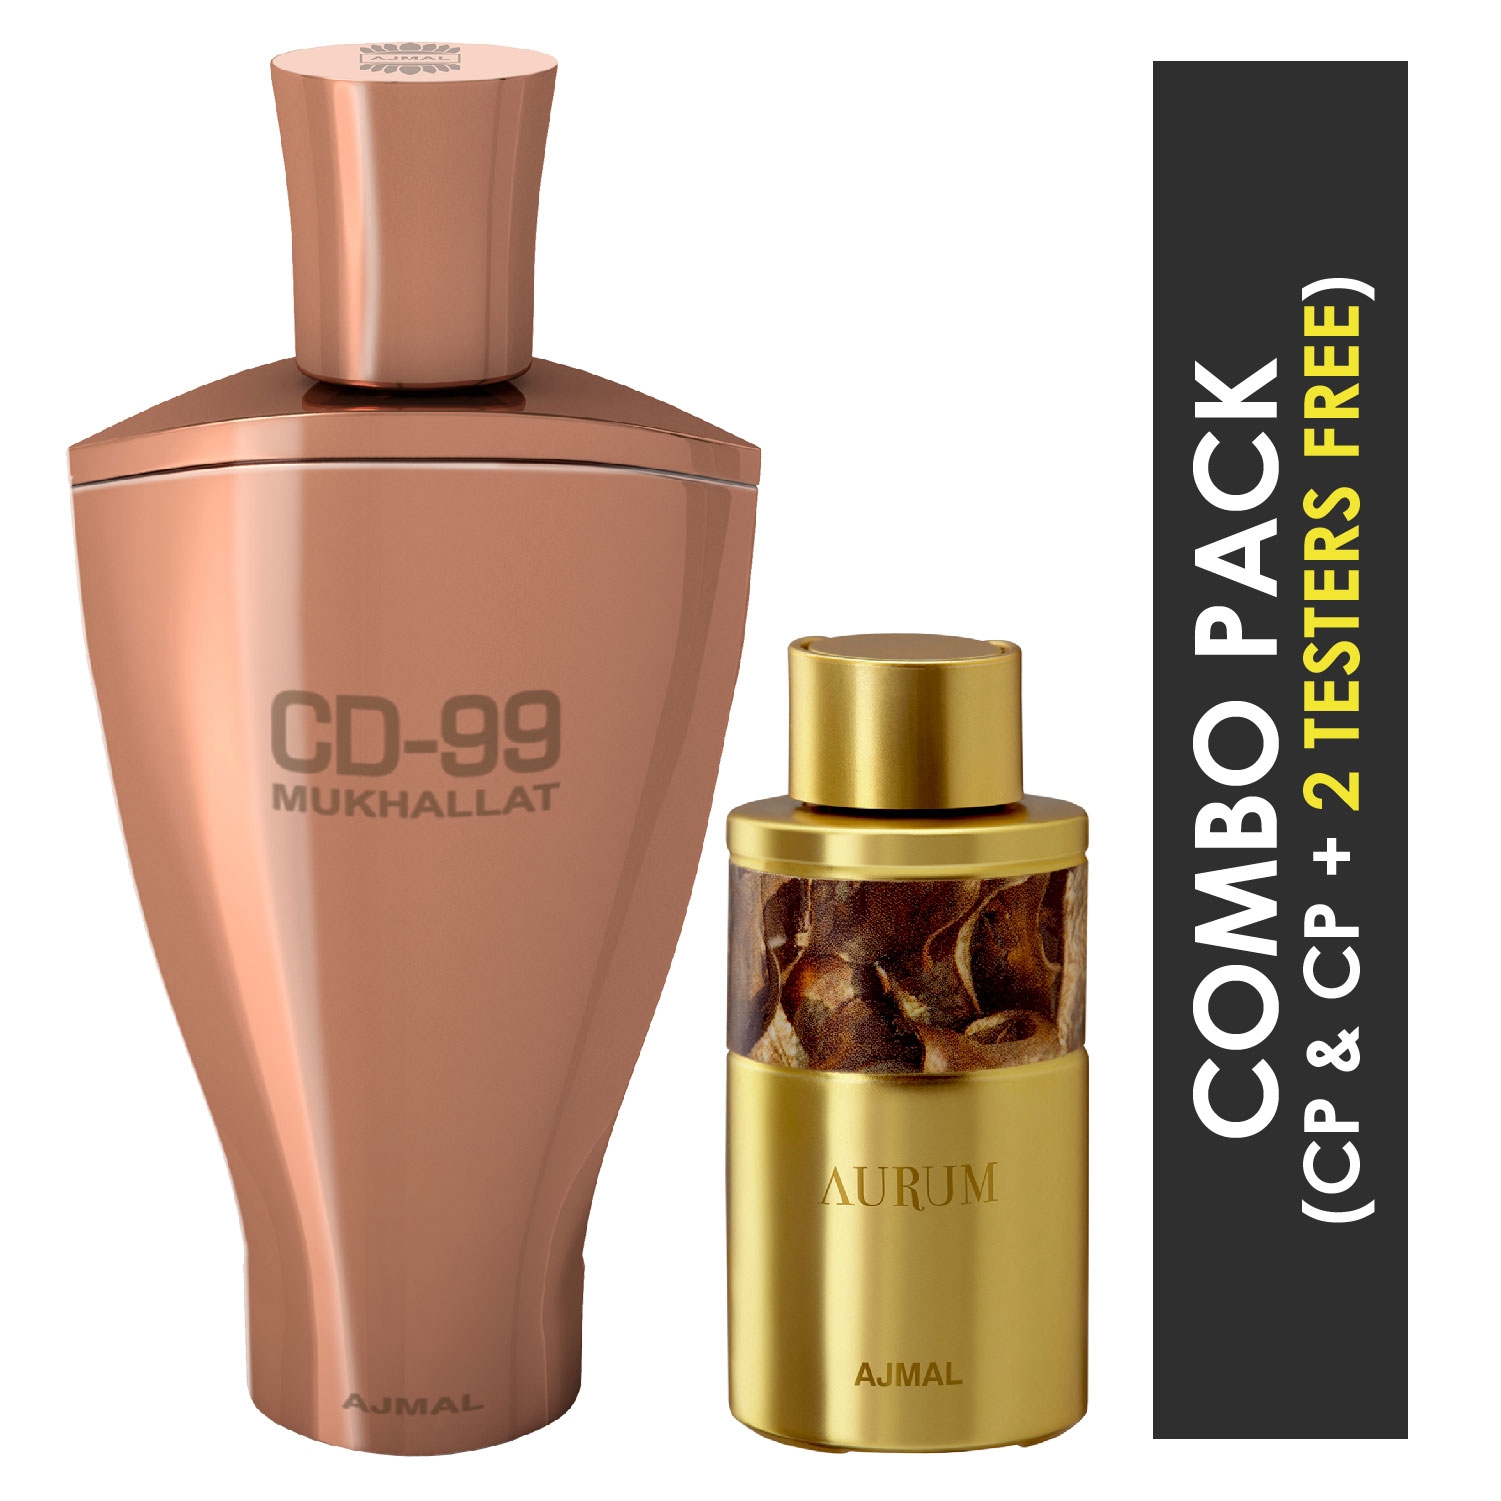 Ajmal | Ajmal CD 99 Mukhallat Concentrated Perfume Attar 14ml for Unisex and Aurum Concentrated Perfume Attar 10ml for Women + 2 Parfum Testers FREE